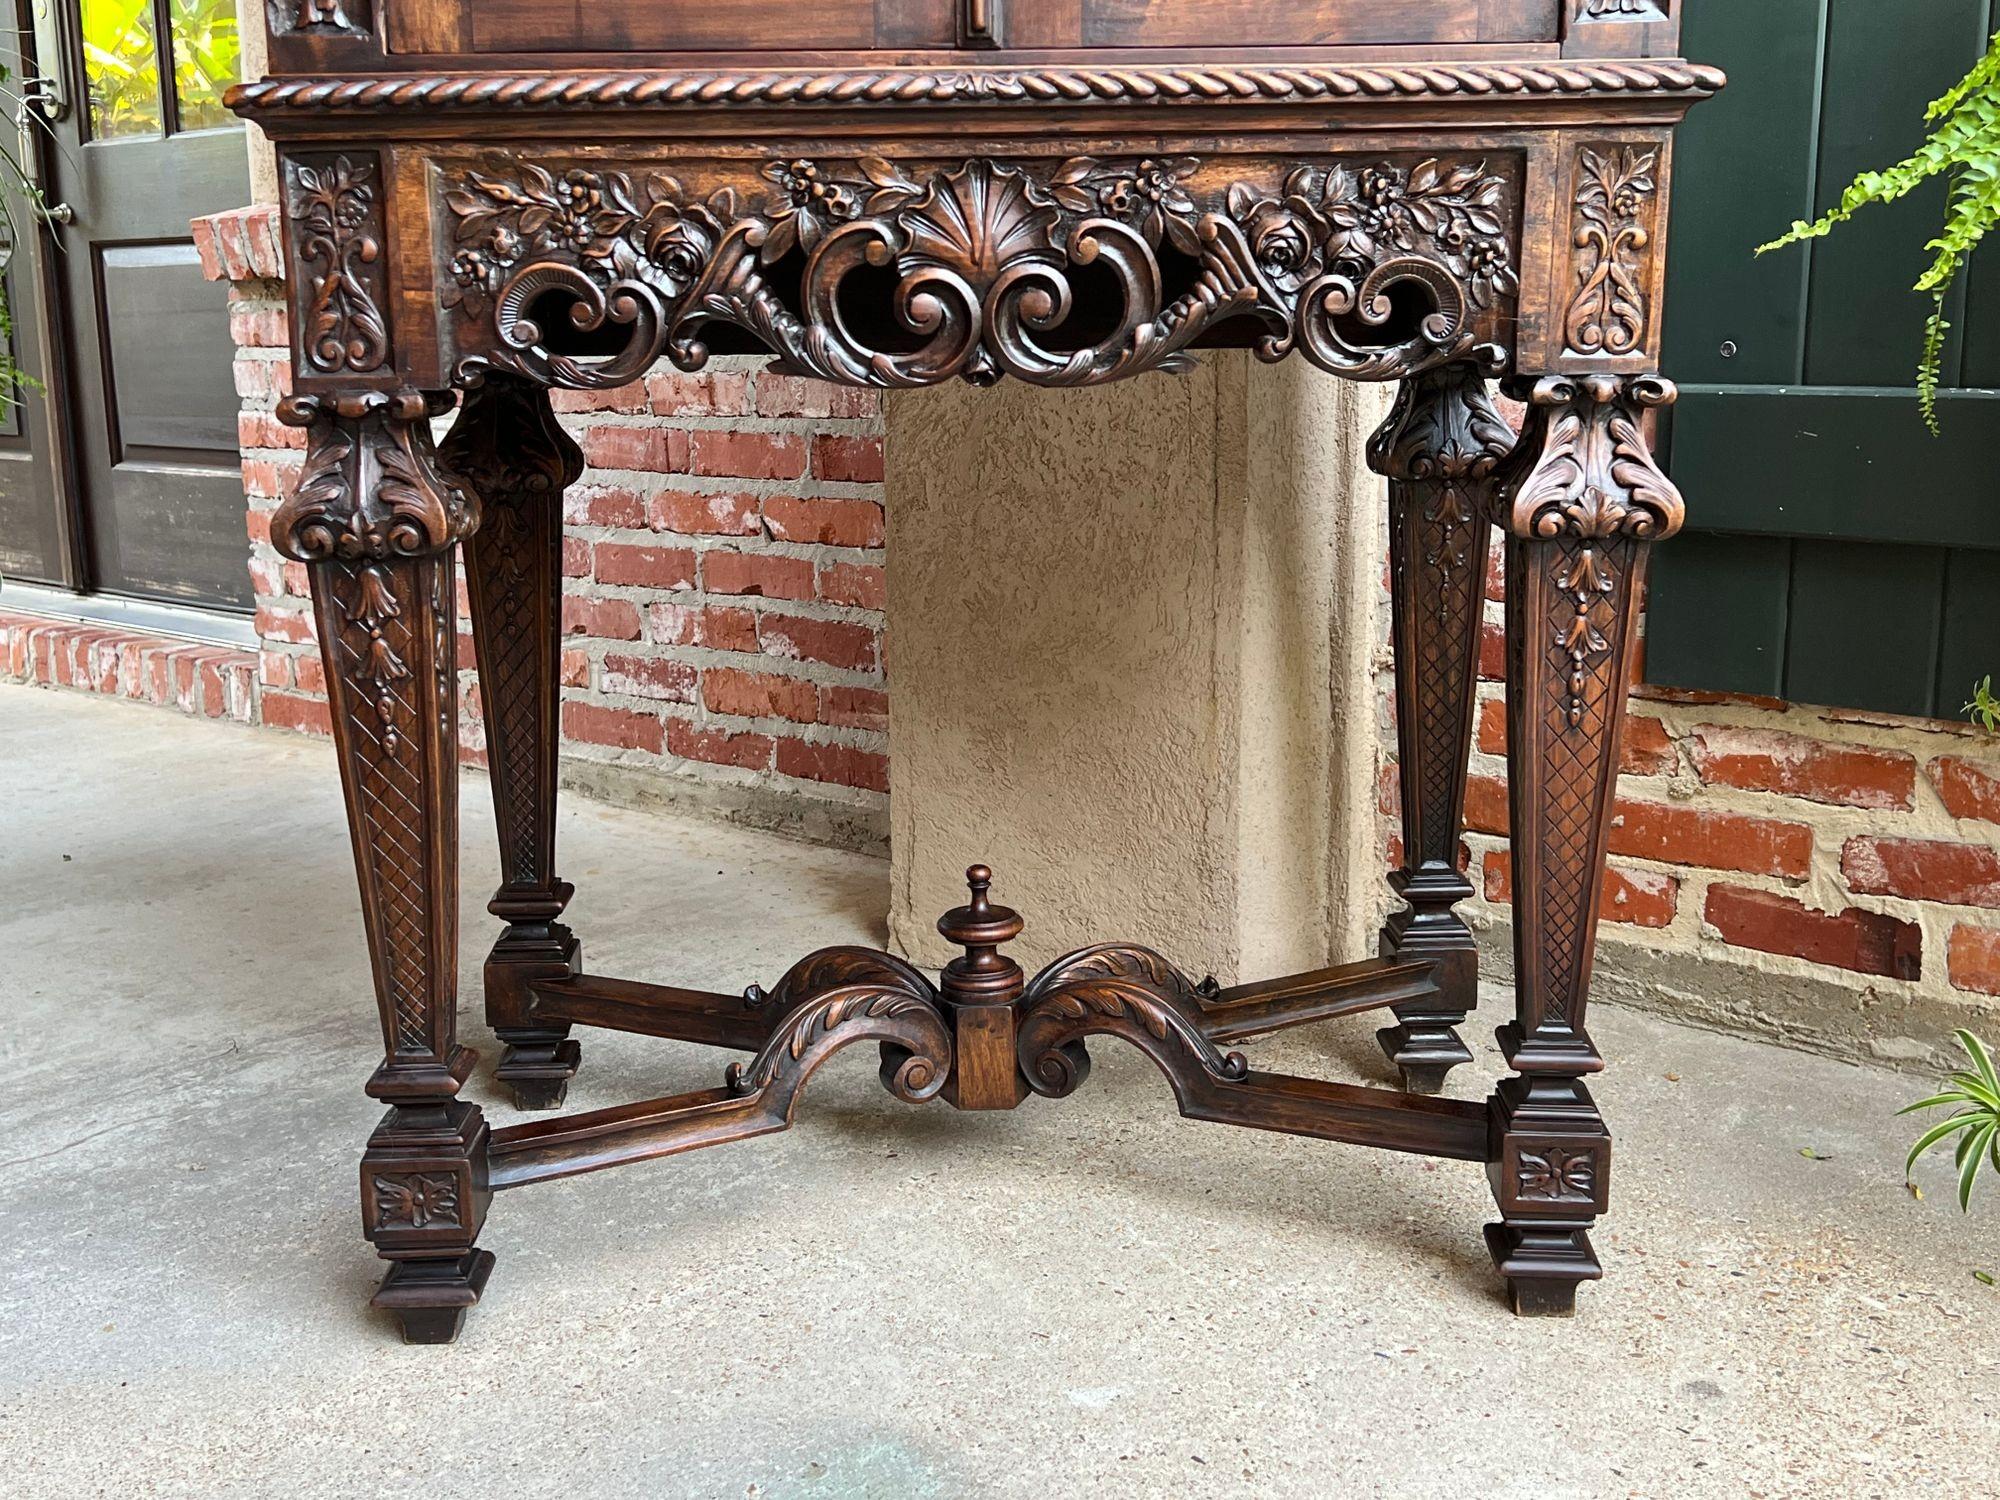 19th century French Carved Walnut Cabinet Bar Renaissance Wine Server Baroque.
 
 Direct from Europe, a highly carved antique cabinet, with a drop down back, which perfectly adapts for a wine/liquor cabinet! However, the story here should really be